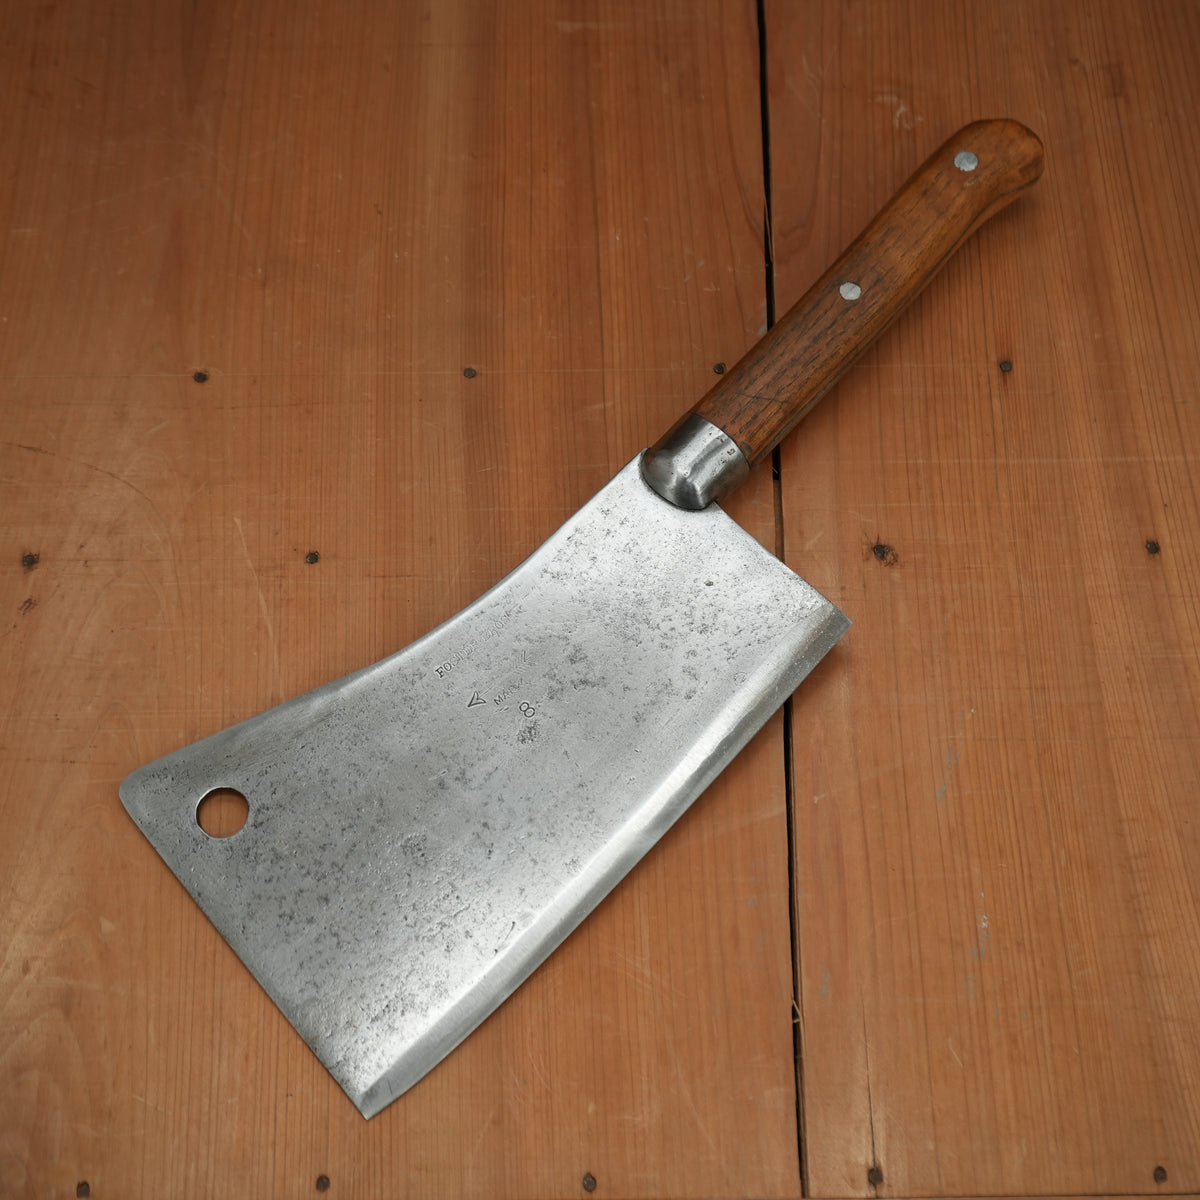 Foster Bros 8" Cleaver Handforged Laminated Steel Old Re-Handle